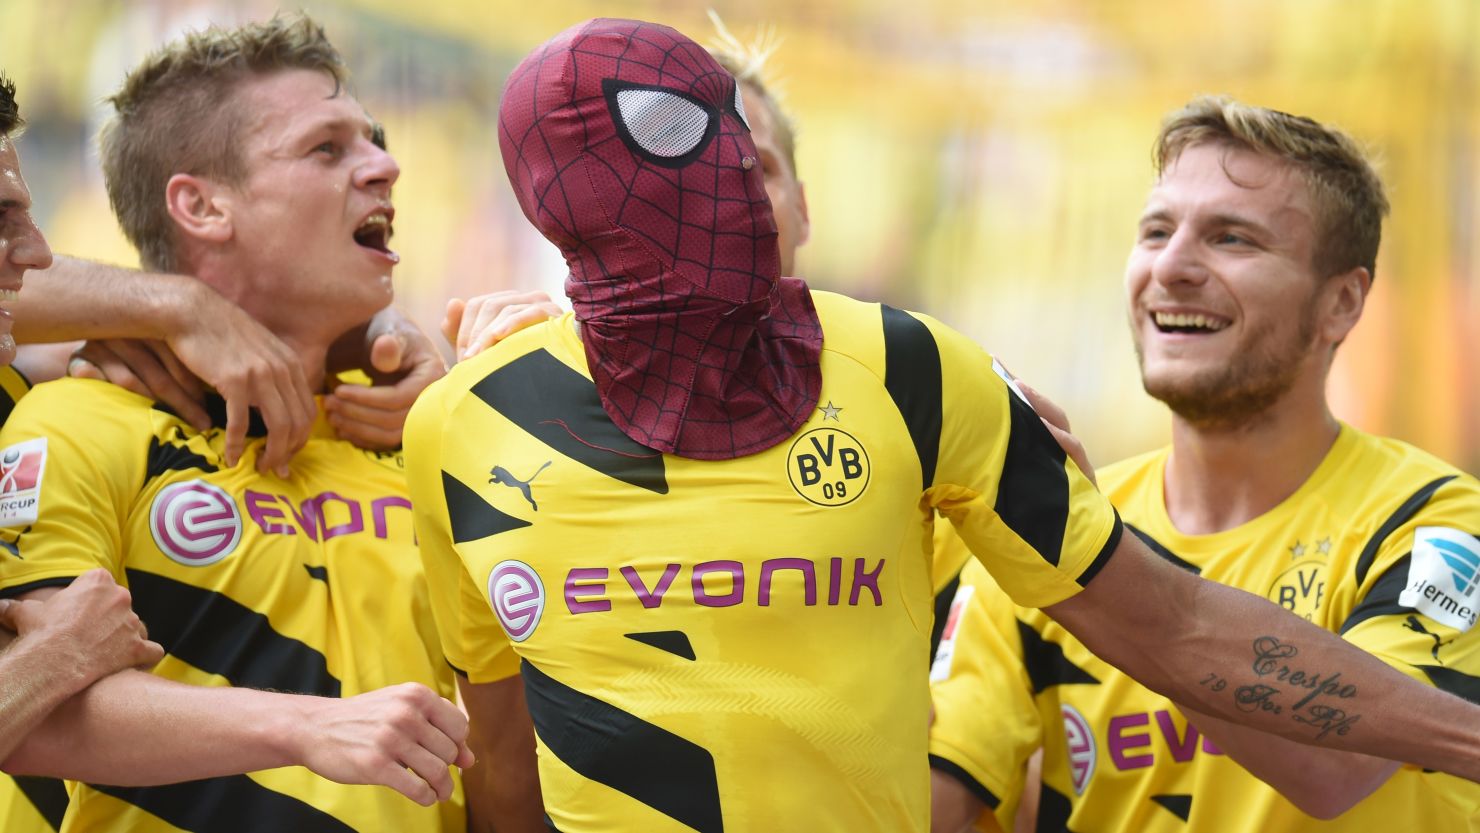 Pierre-Emerick Aubameyang pulled on a Spider-Man mask after scoring Dortmund's second of the game.